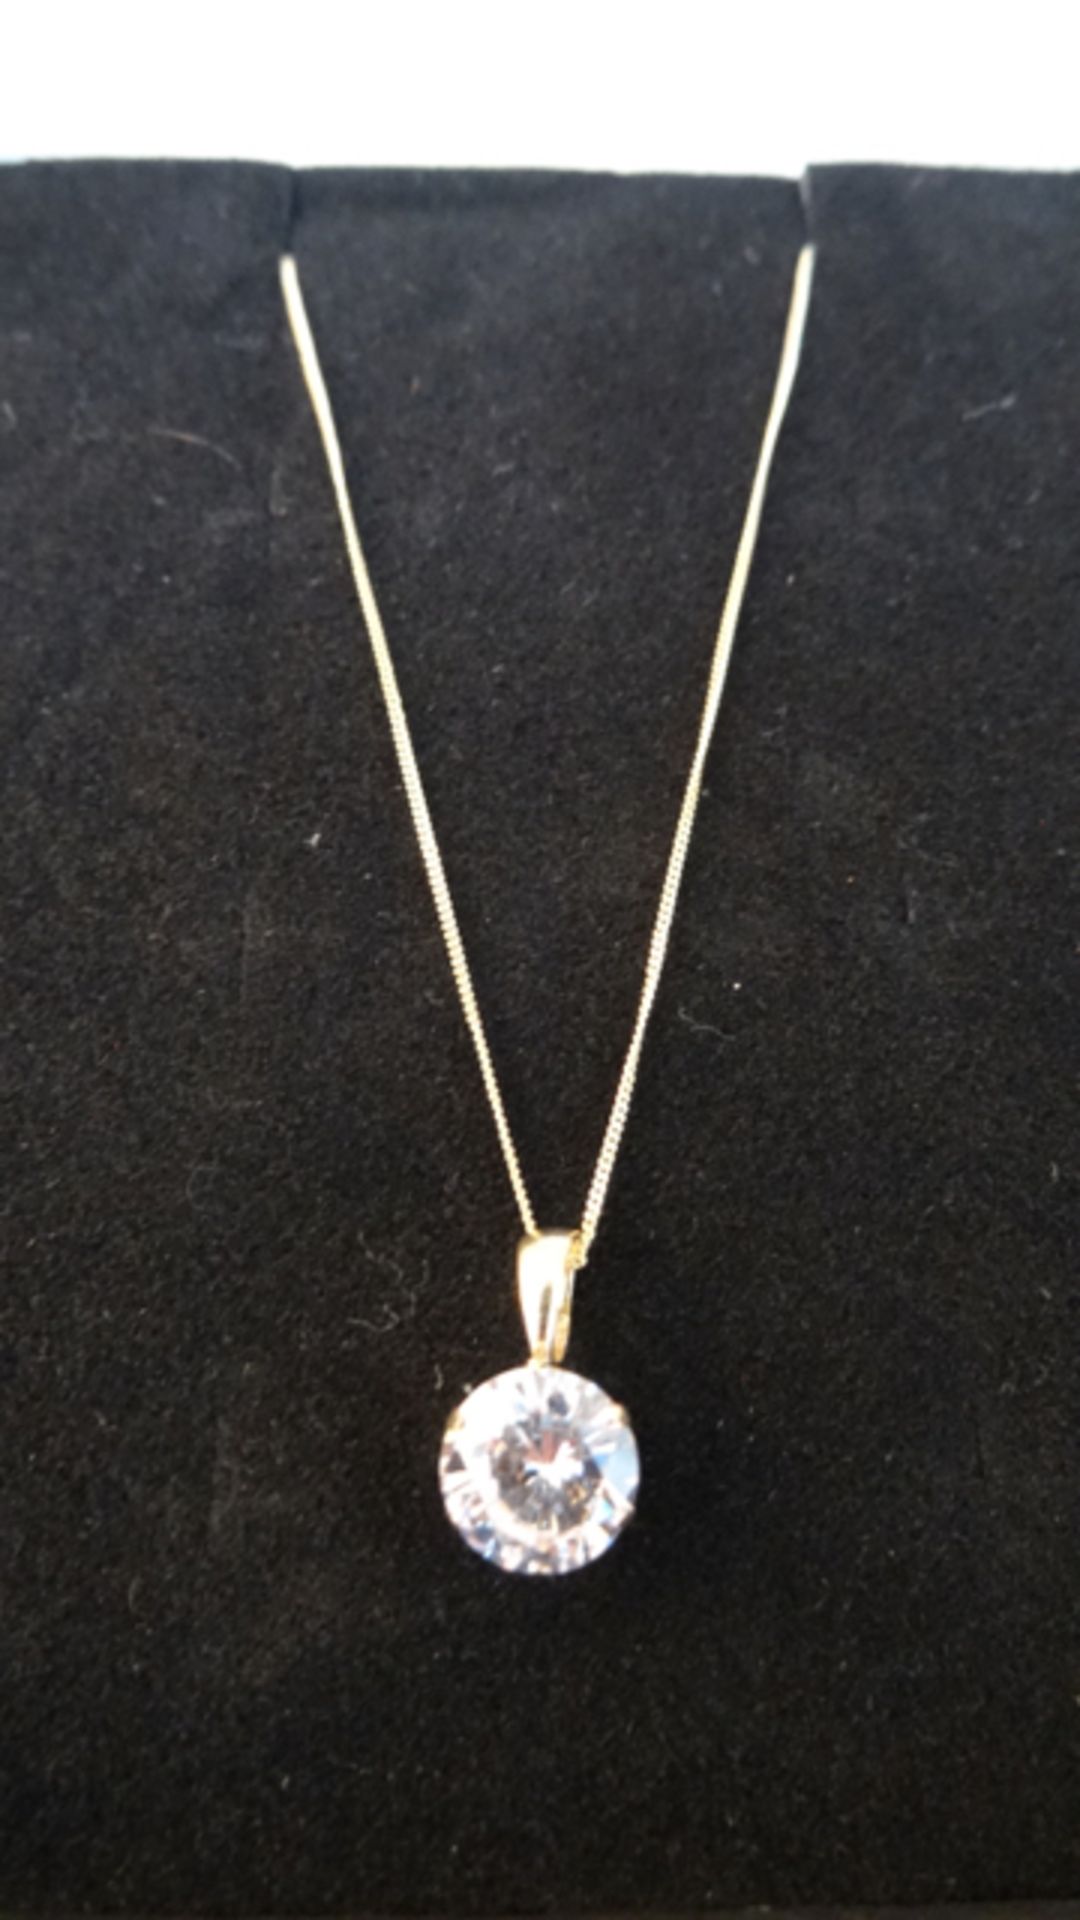 1 x 9 Carat Yellow Gold Chain with Cubic Zirconia Pendant. Retail value £79. UK TRACKED DELIVERY - Image 2 of 3